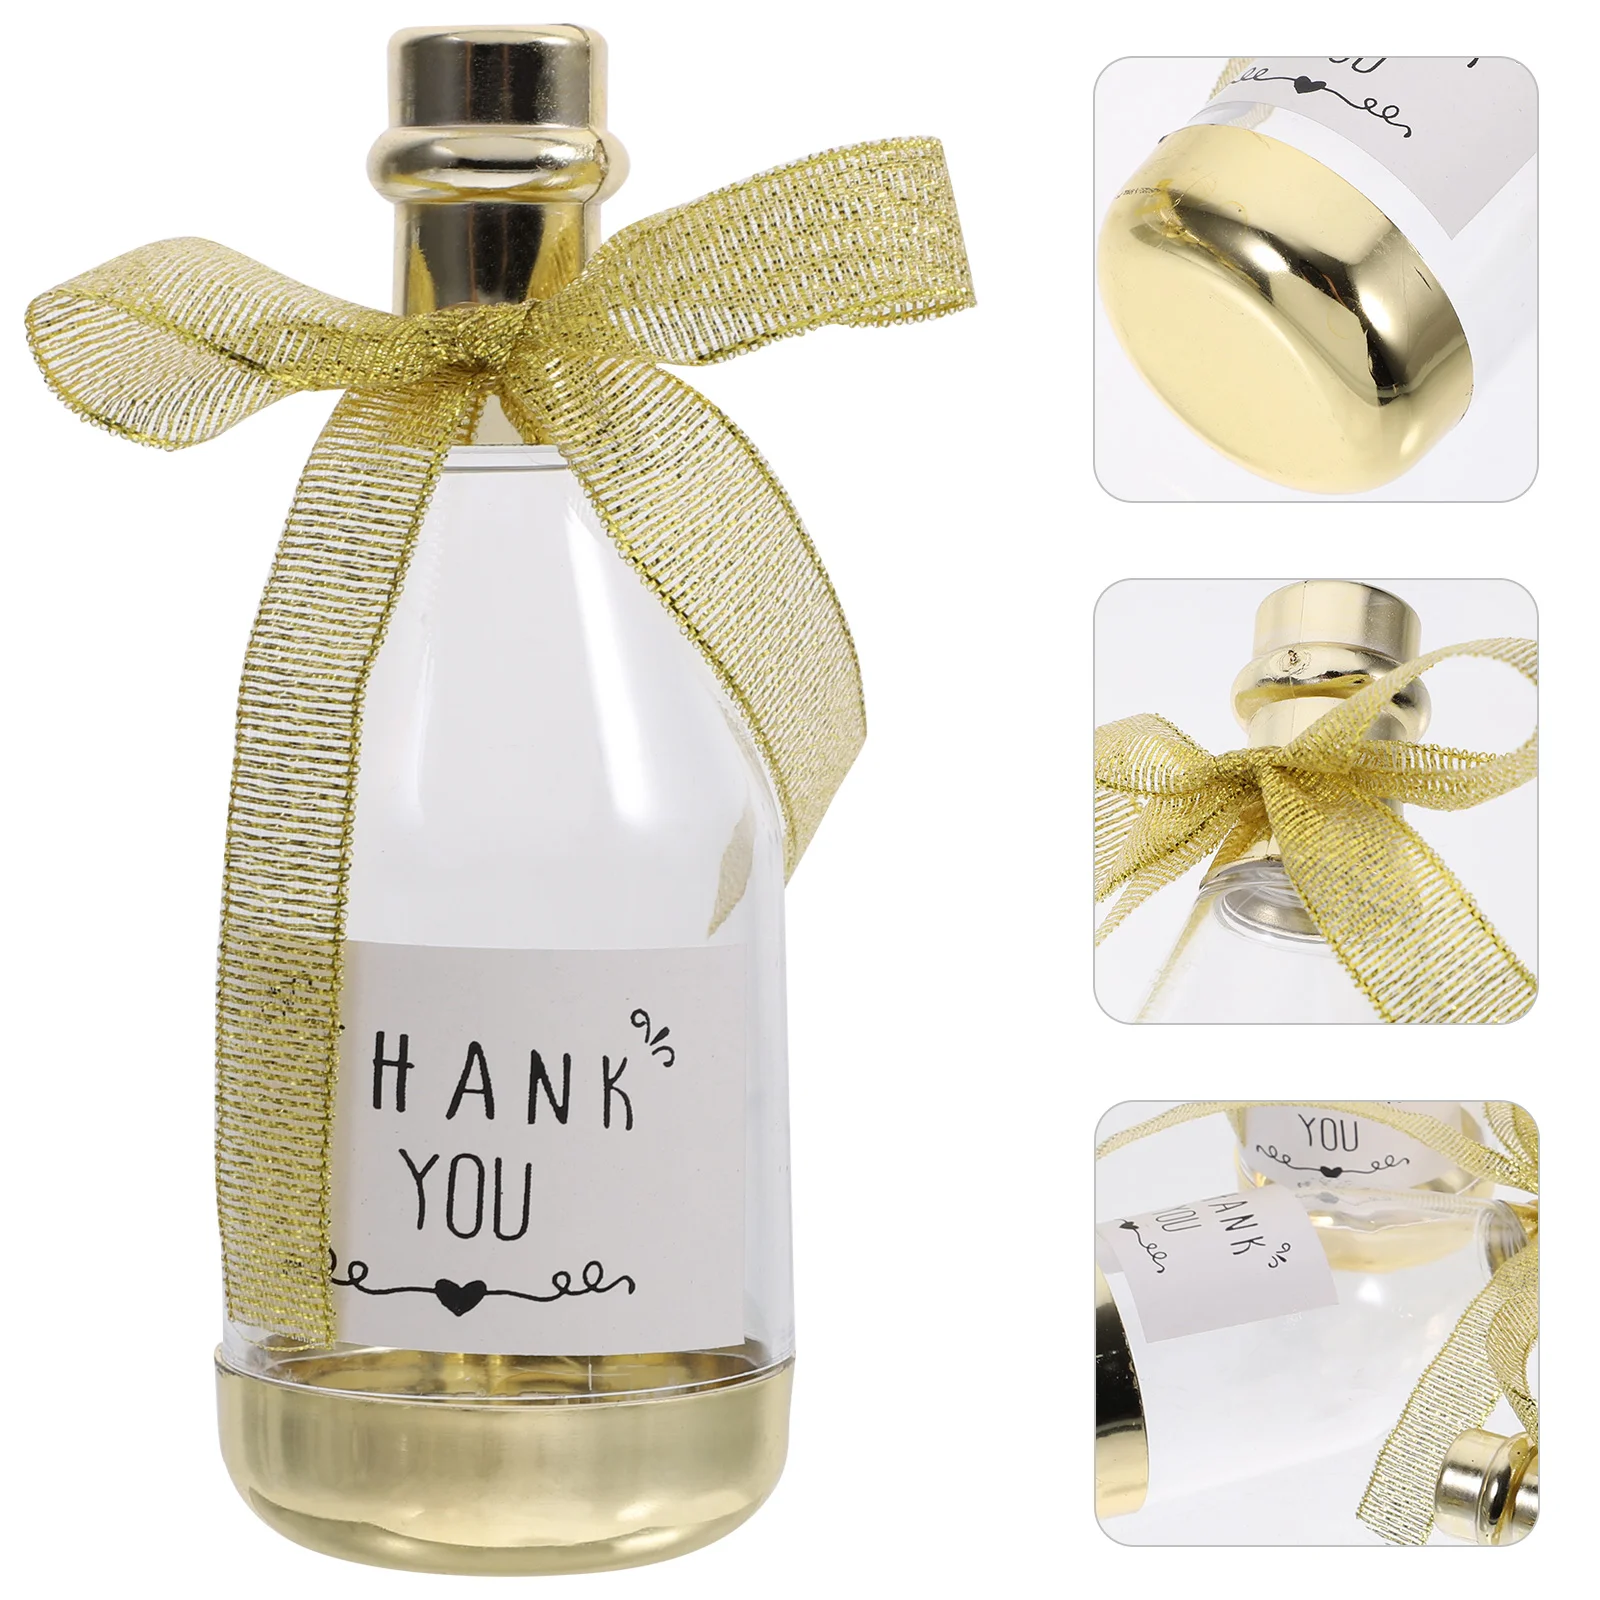 

12 Pcs Favor Boxes for Wedding Personalized Bottle Treat Containers Small Chocolate Candy Party Favors Banquet